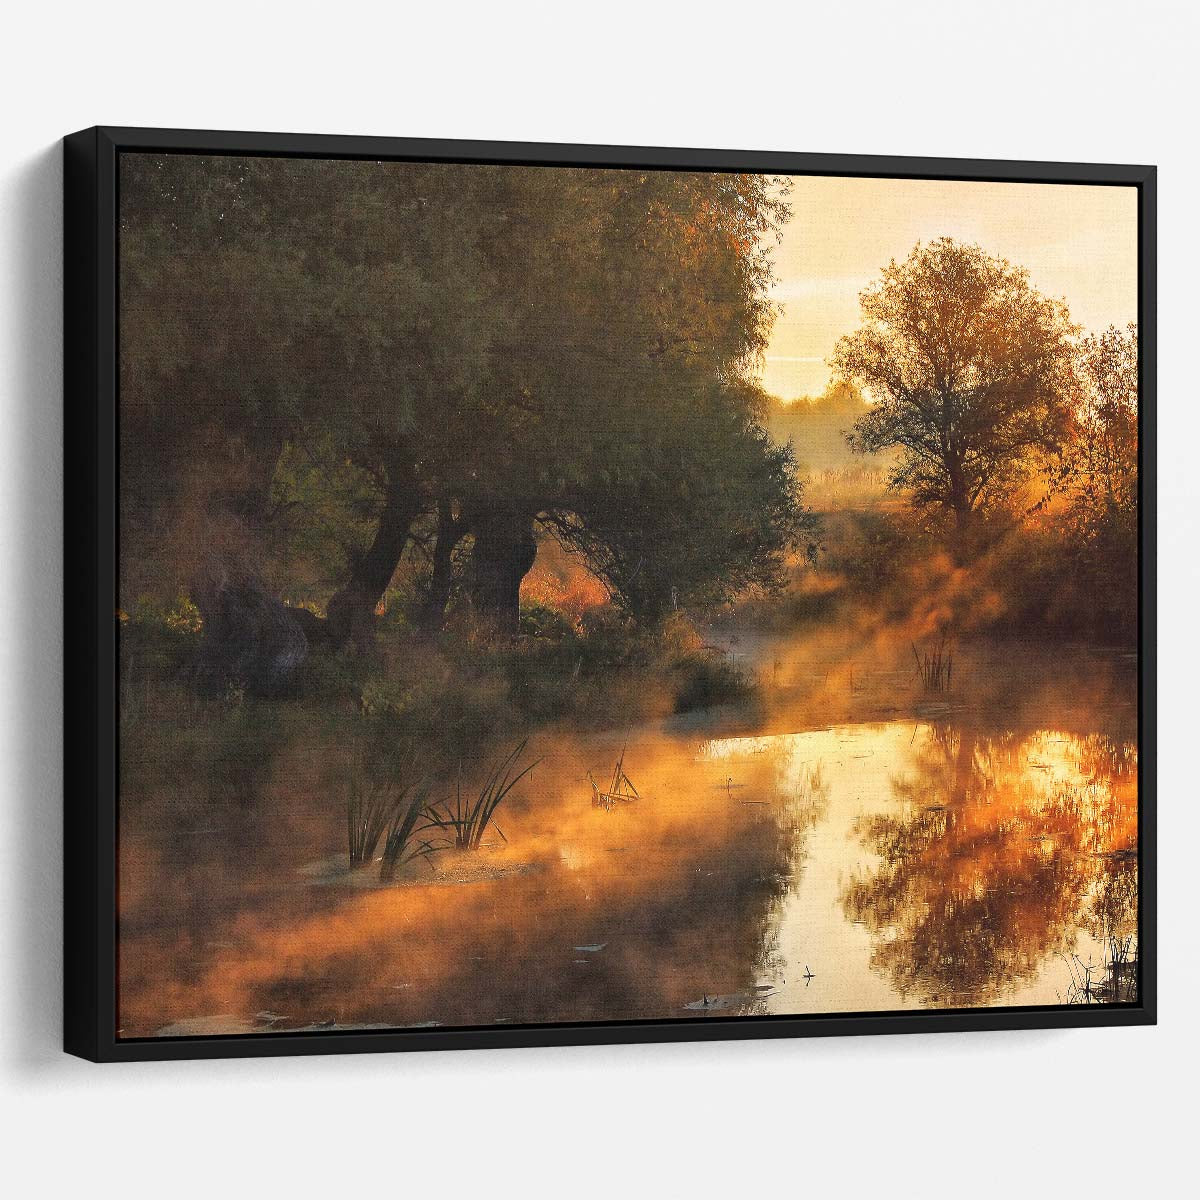 Autumnal Golden Forest Light Rays Wall Art by Luxuriance Designs. Made in USA.